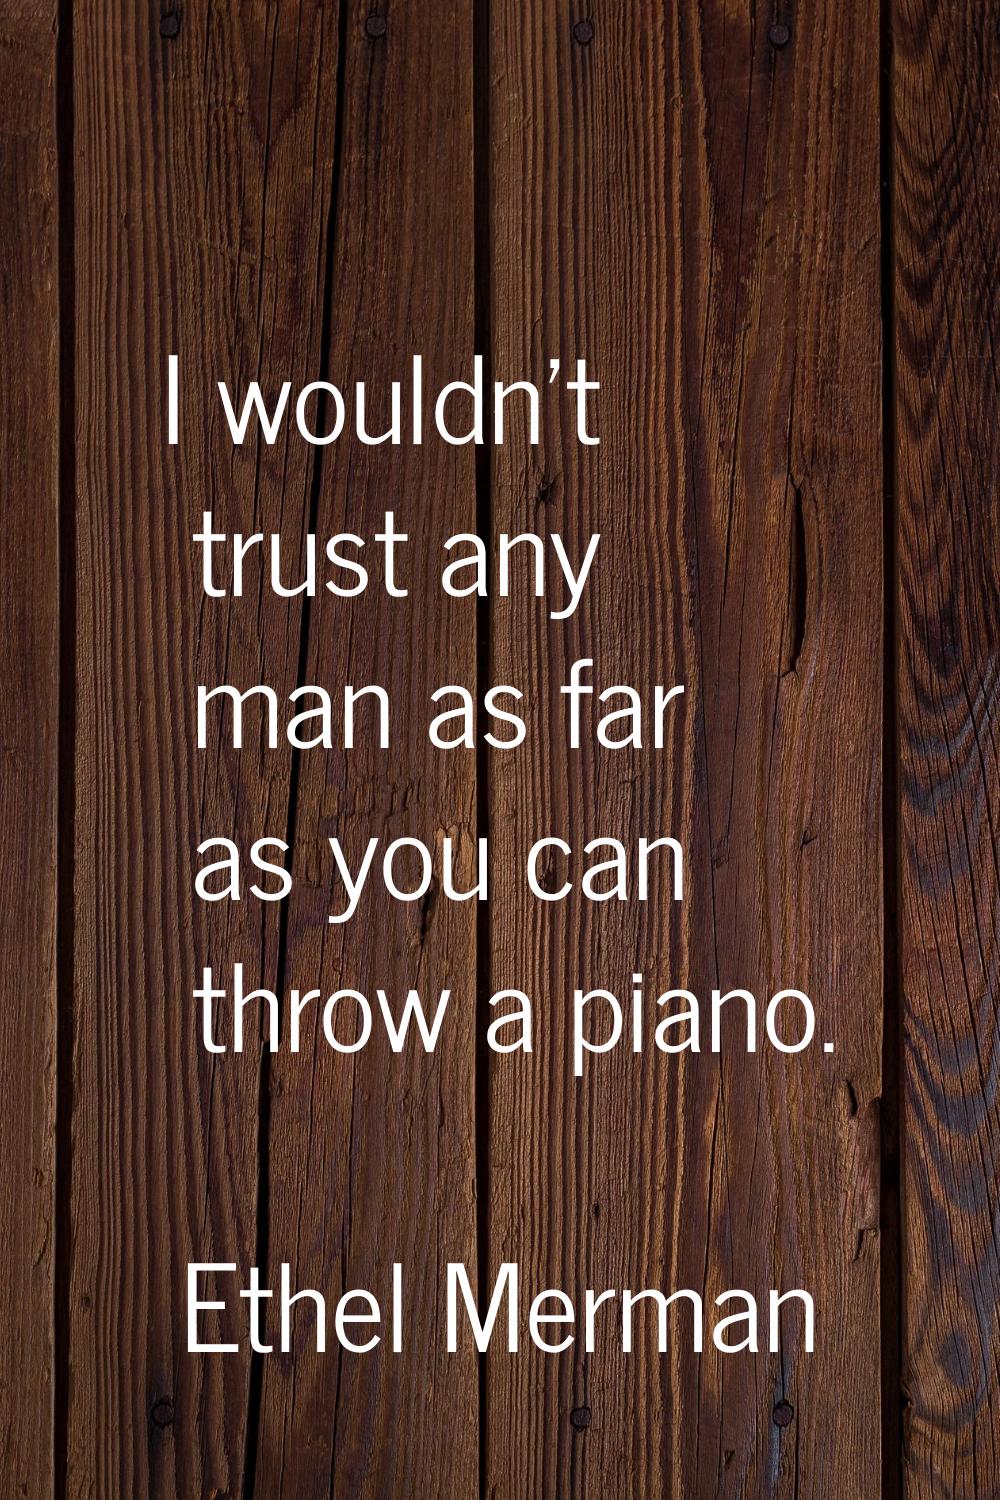 I wouldn't trust any man as far as you can throw a piano.